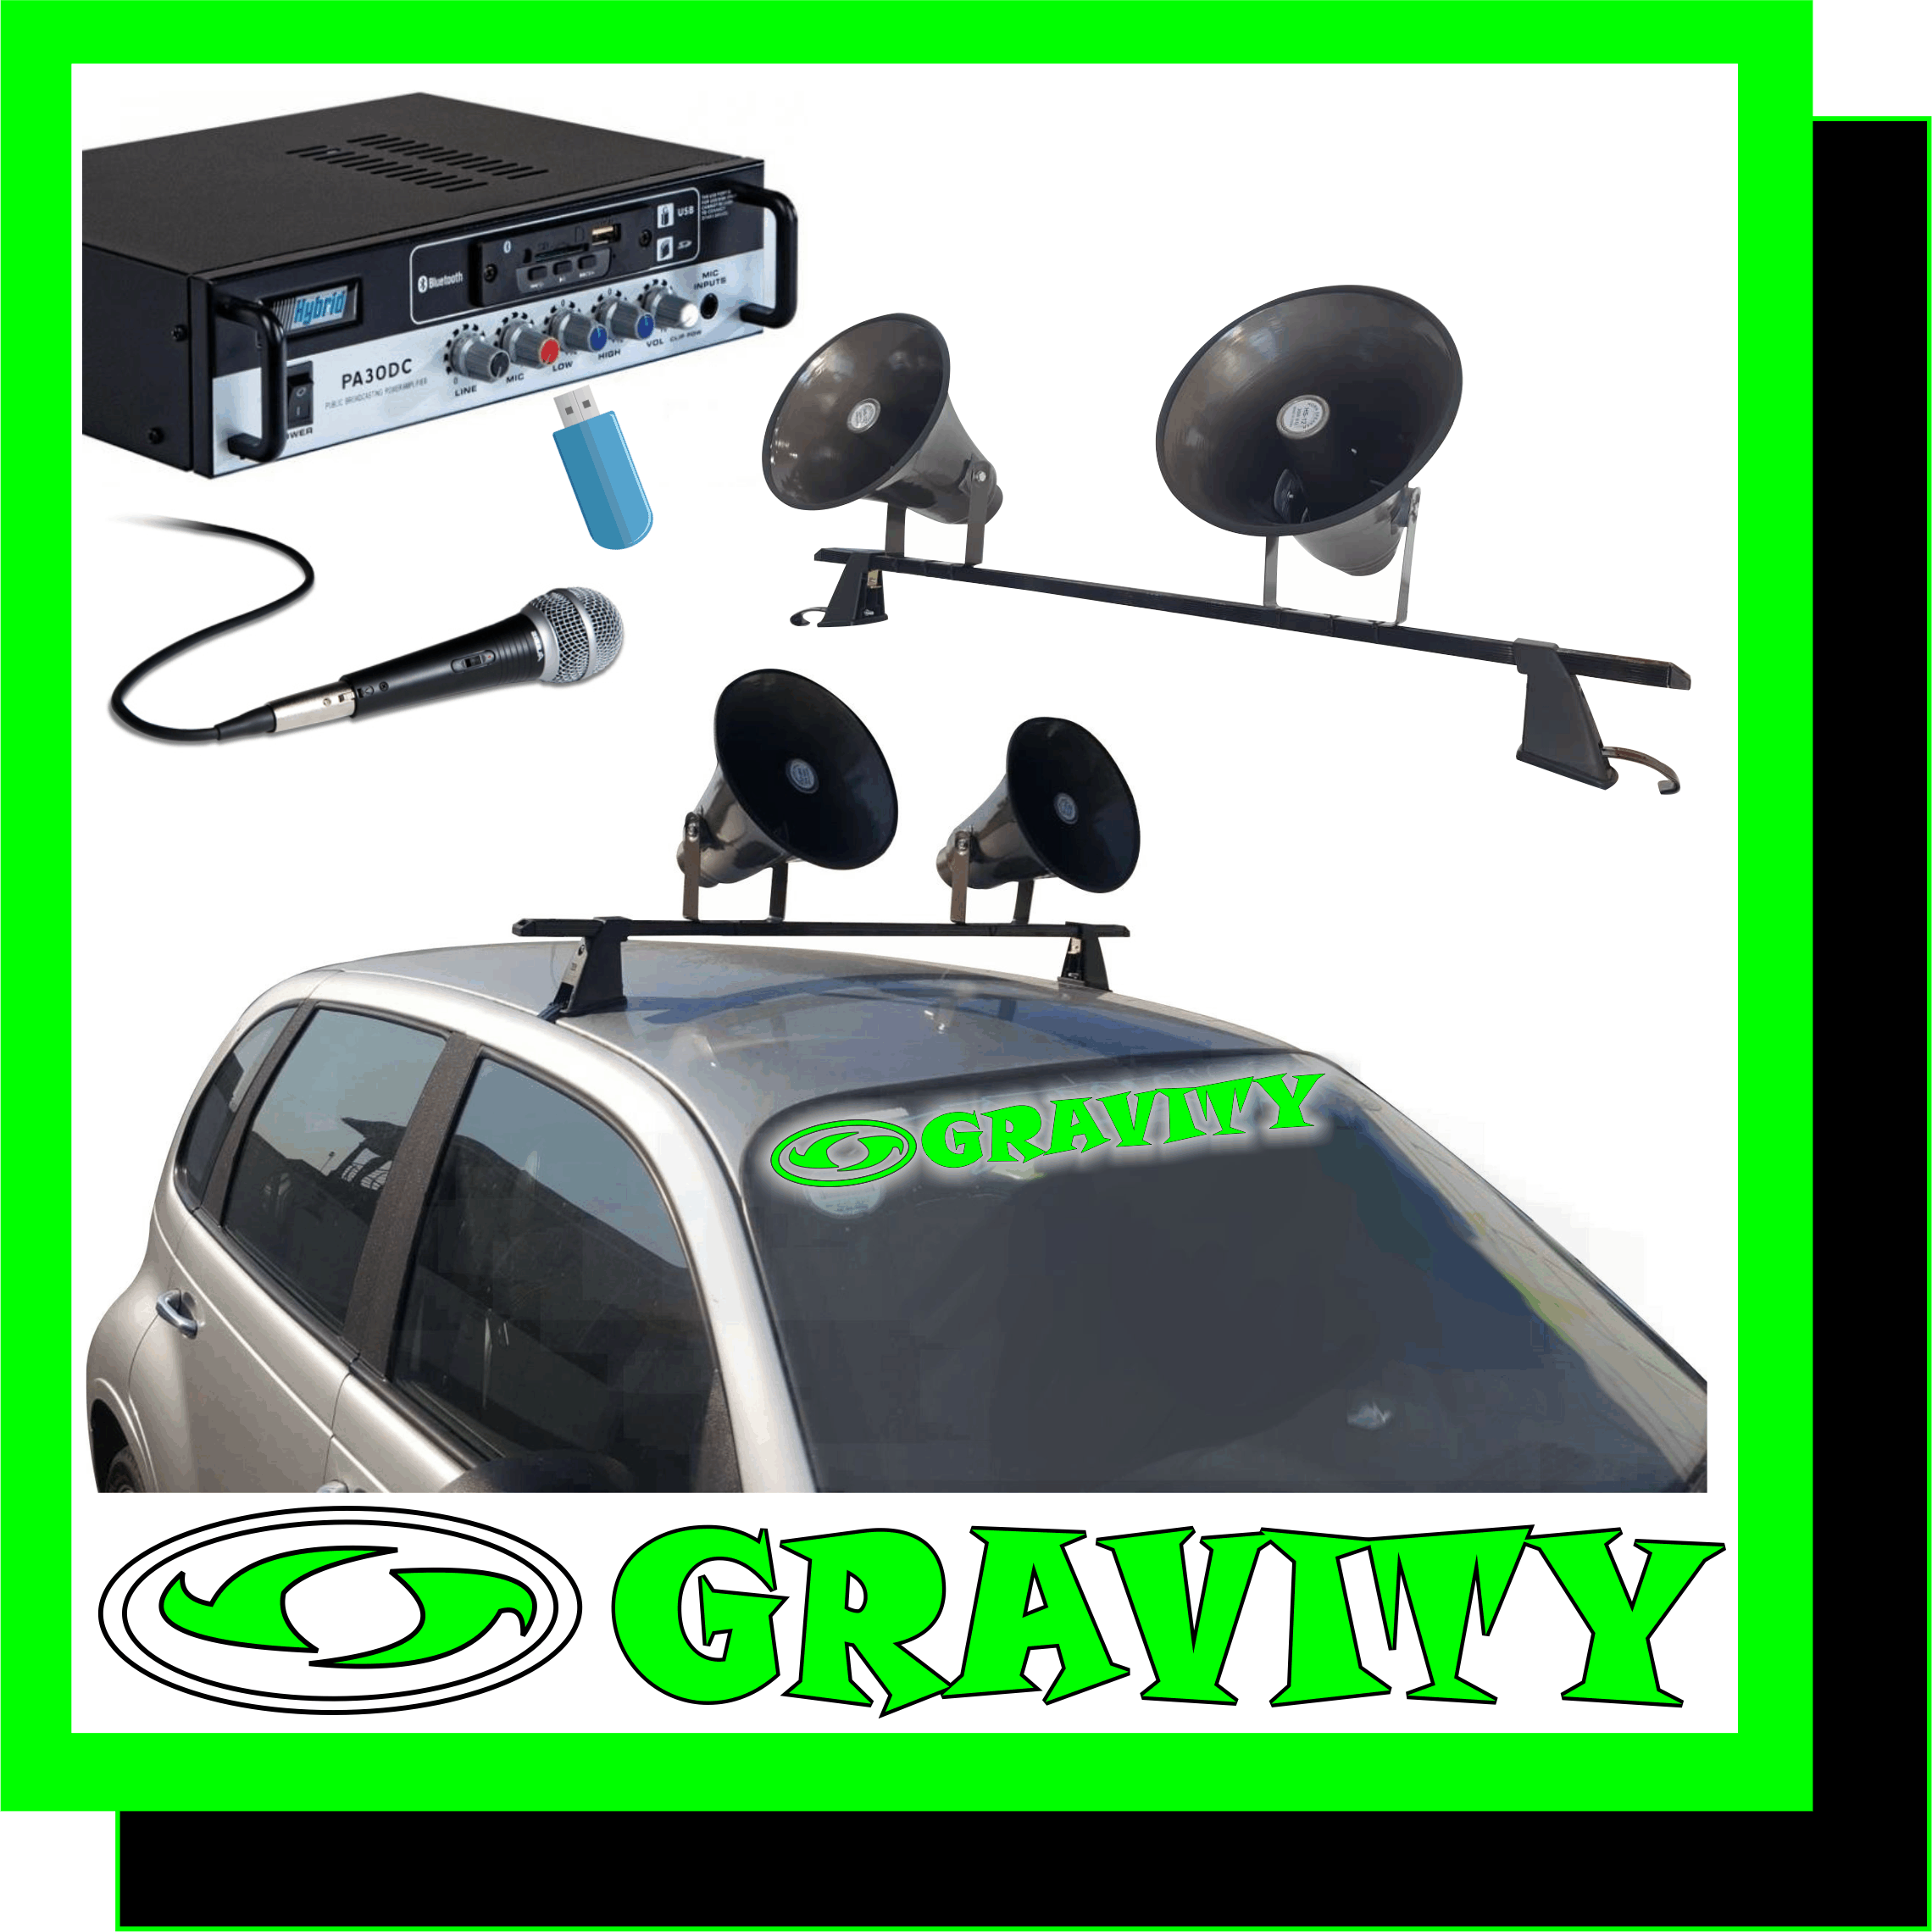 1x Linetec 12v Pa Amplifier   *USB/SD Card input Playback   *2x Mic input with seperate gain controls   *Mic Echo   *300w Amplifeir  +  2x 10inch Pa Loudhailer Horns  +  1x Gutterless Roof Rack  +  1x Handheld Mic + 3meter Mic Cable  +  1x 5meter Power Cable  +  1x 10meter Speaker Cable